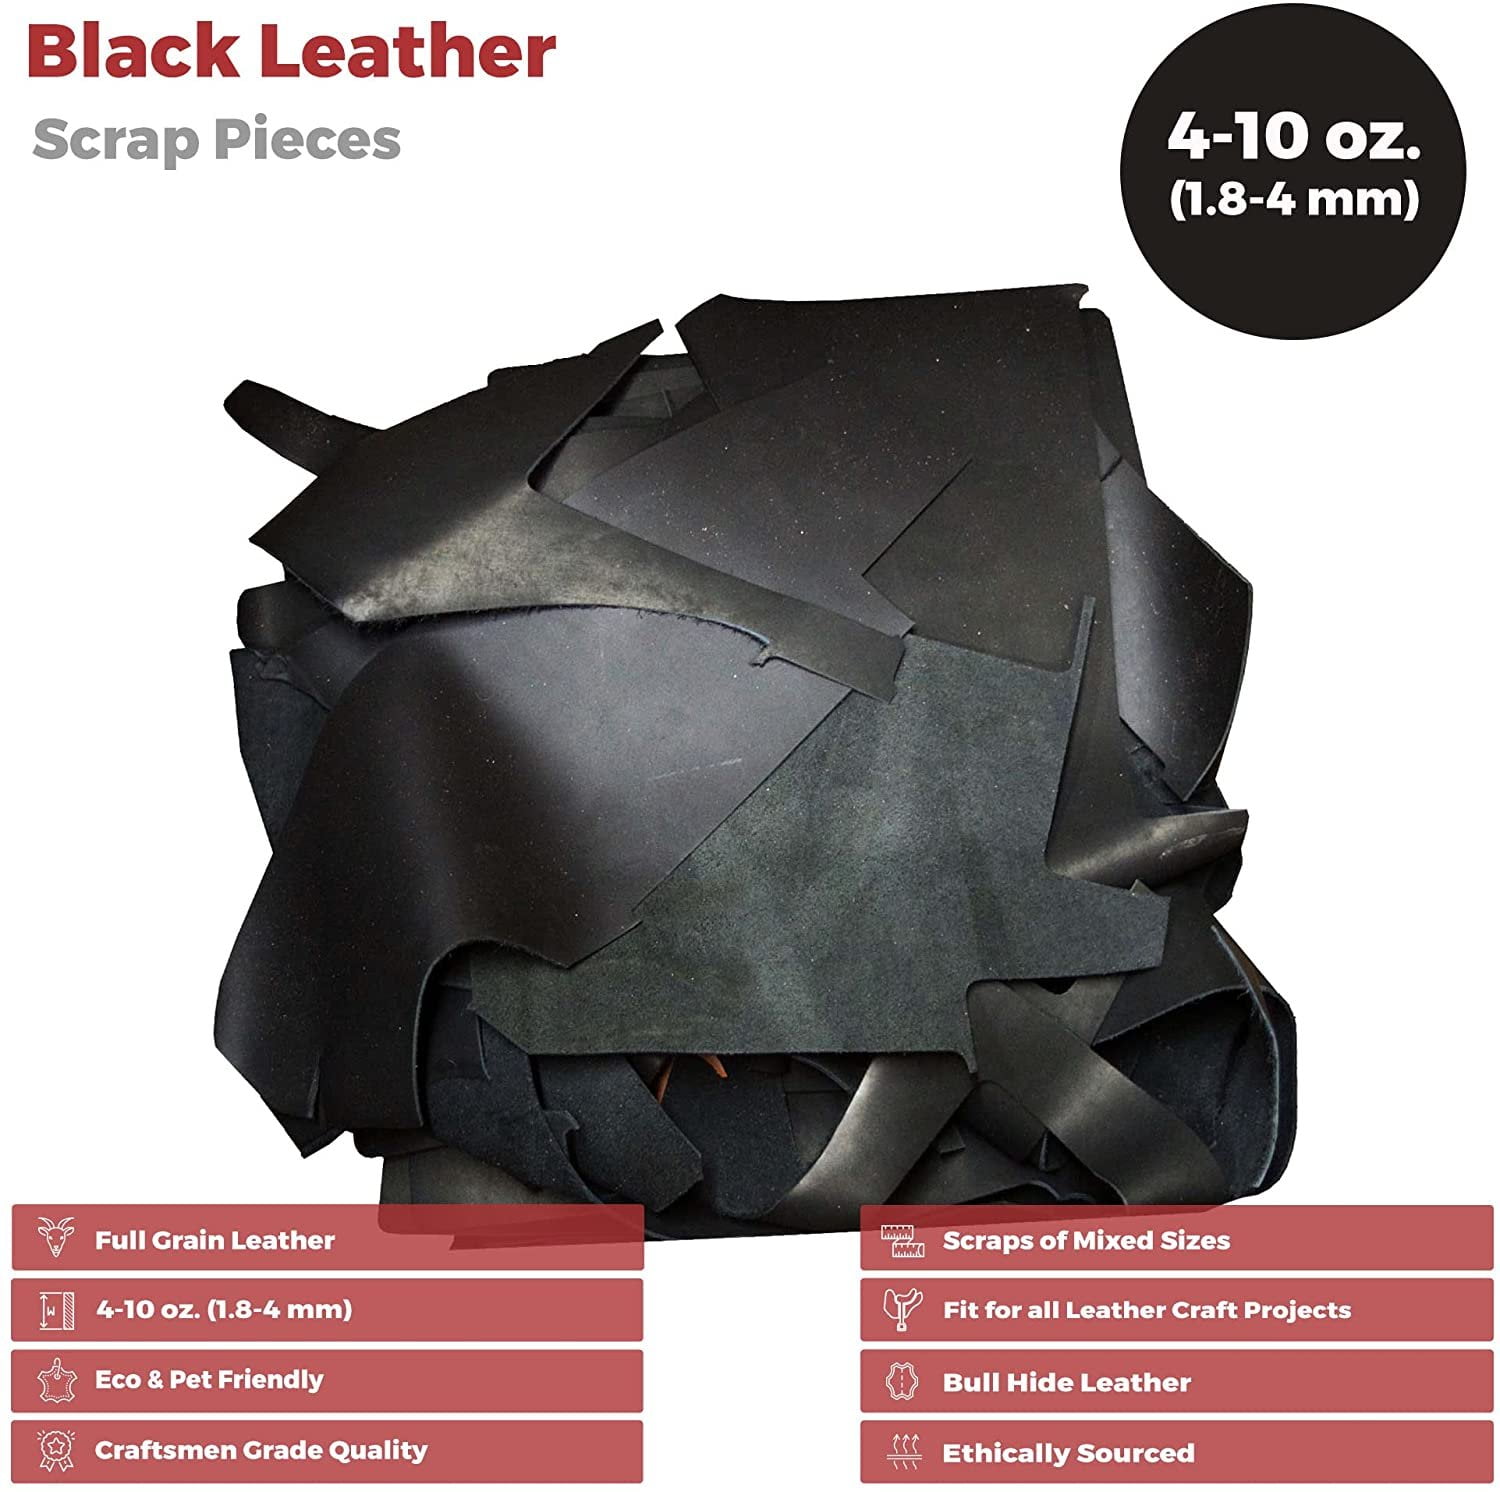 European Leather Work 9-10 oz. 3.6-4mm Oil-Tanned Leather Scraps Size: 1 LB  - Bourbon BrownCowhide Full Grain Leather for Tooling, Accessories